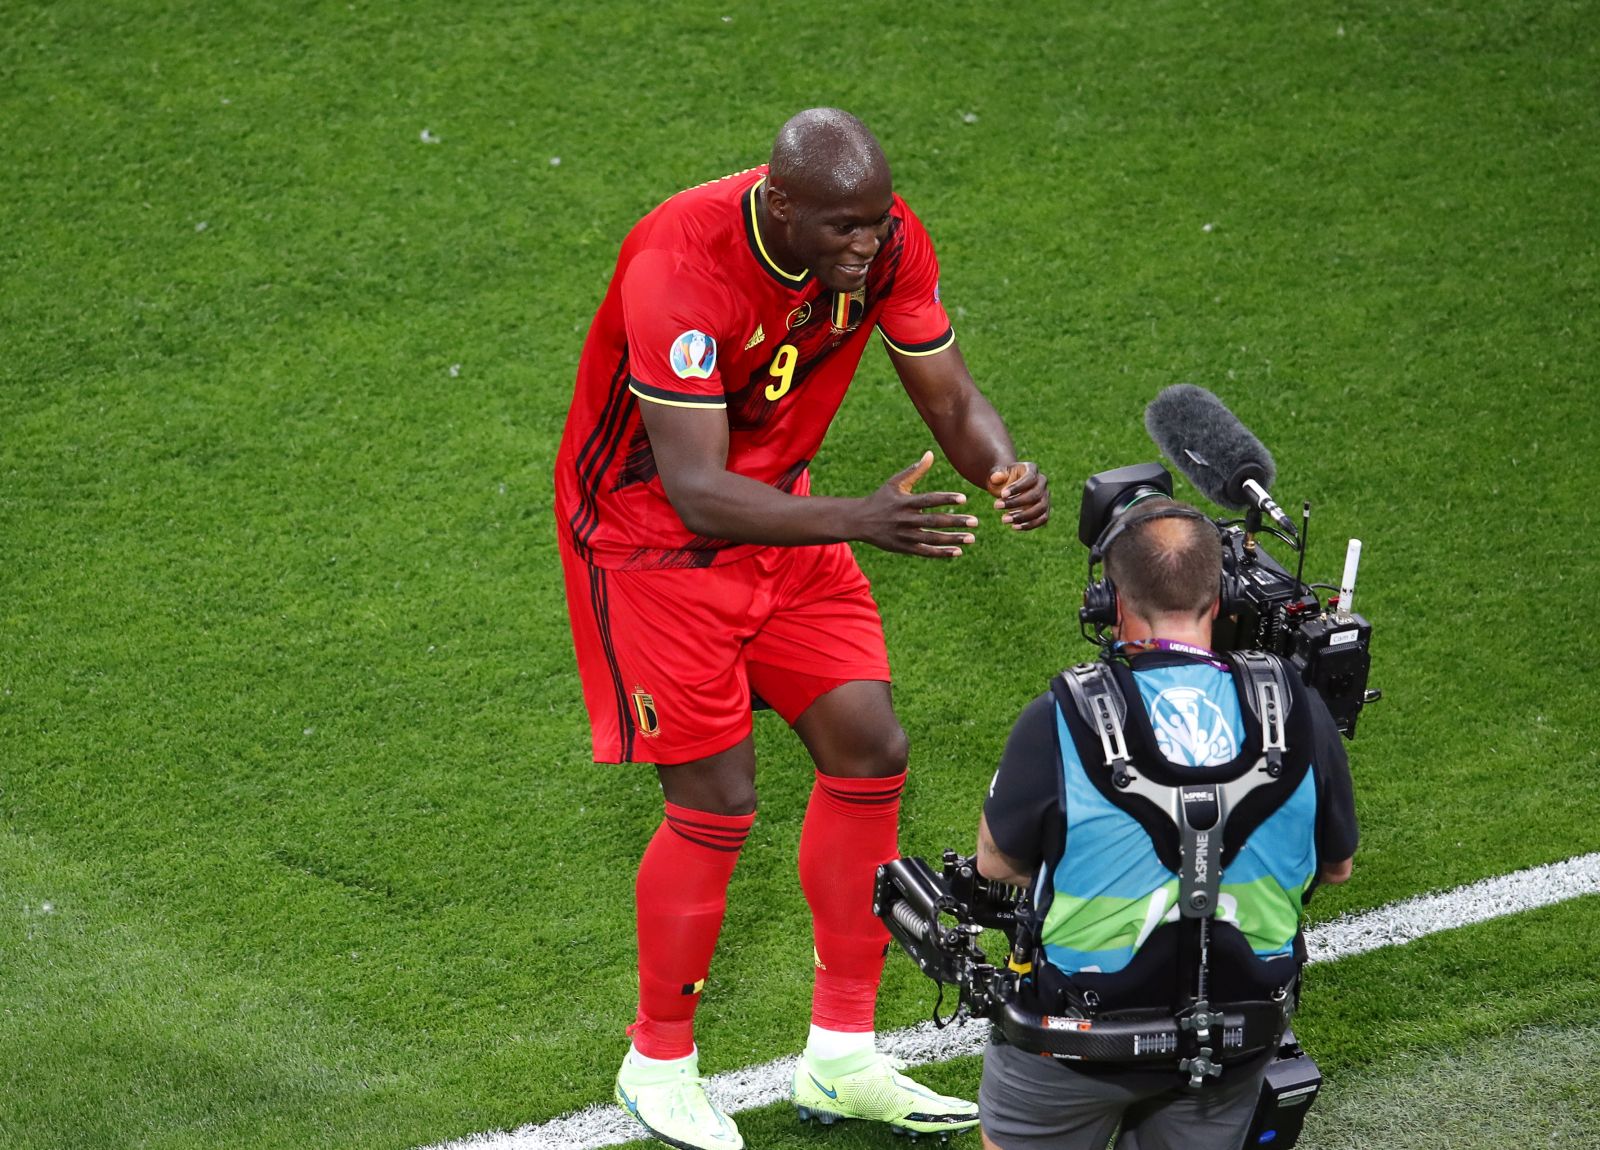 epa09265848 Romelu Lukaku (C) of Belgium celebrates after scoring the 1-0 lead during the UEFA EURO 2020 group B preliminary round soccer match between  Belgium and Russia in St.Petersburg, Russia, 12 June 2021.  EPA/Anton Vaganov / POOL (RESTRICTIONS: For editorial news reporting purposes only. Images must appear as still images and must not emulate match action video footage. Photographs published in online publications shall have an interval of at least 20 seconds between the posting.)